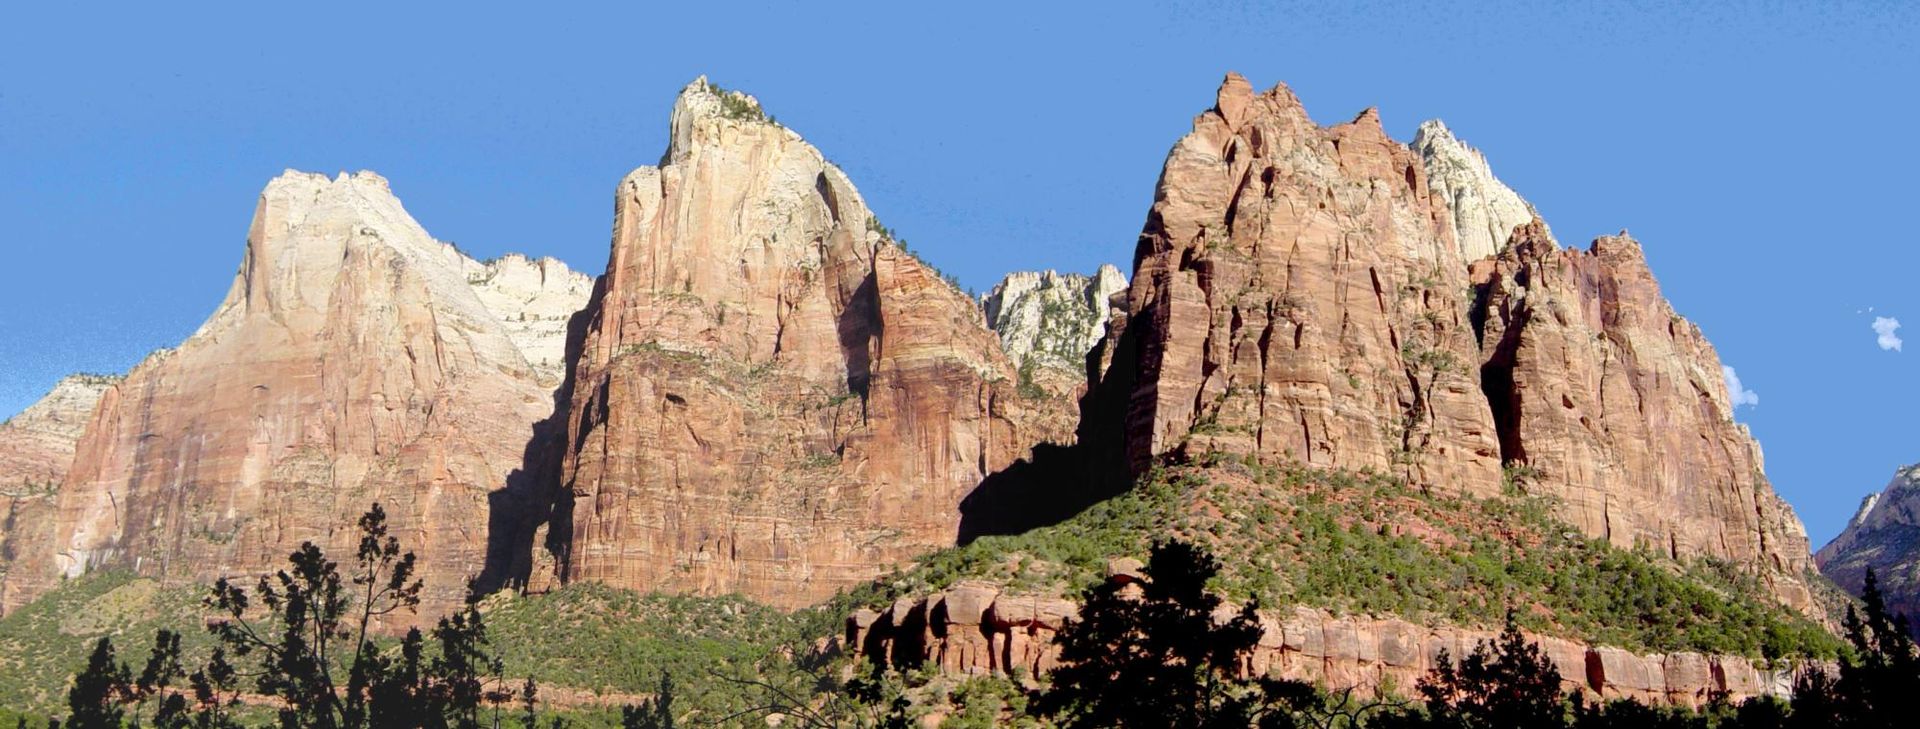 The Three Patriarchs in Zion Canyon are made of Navajo Sandstone